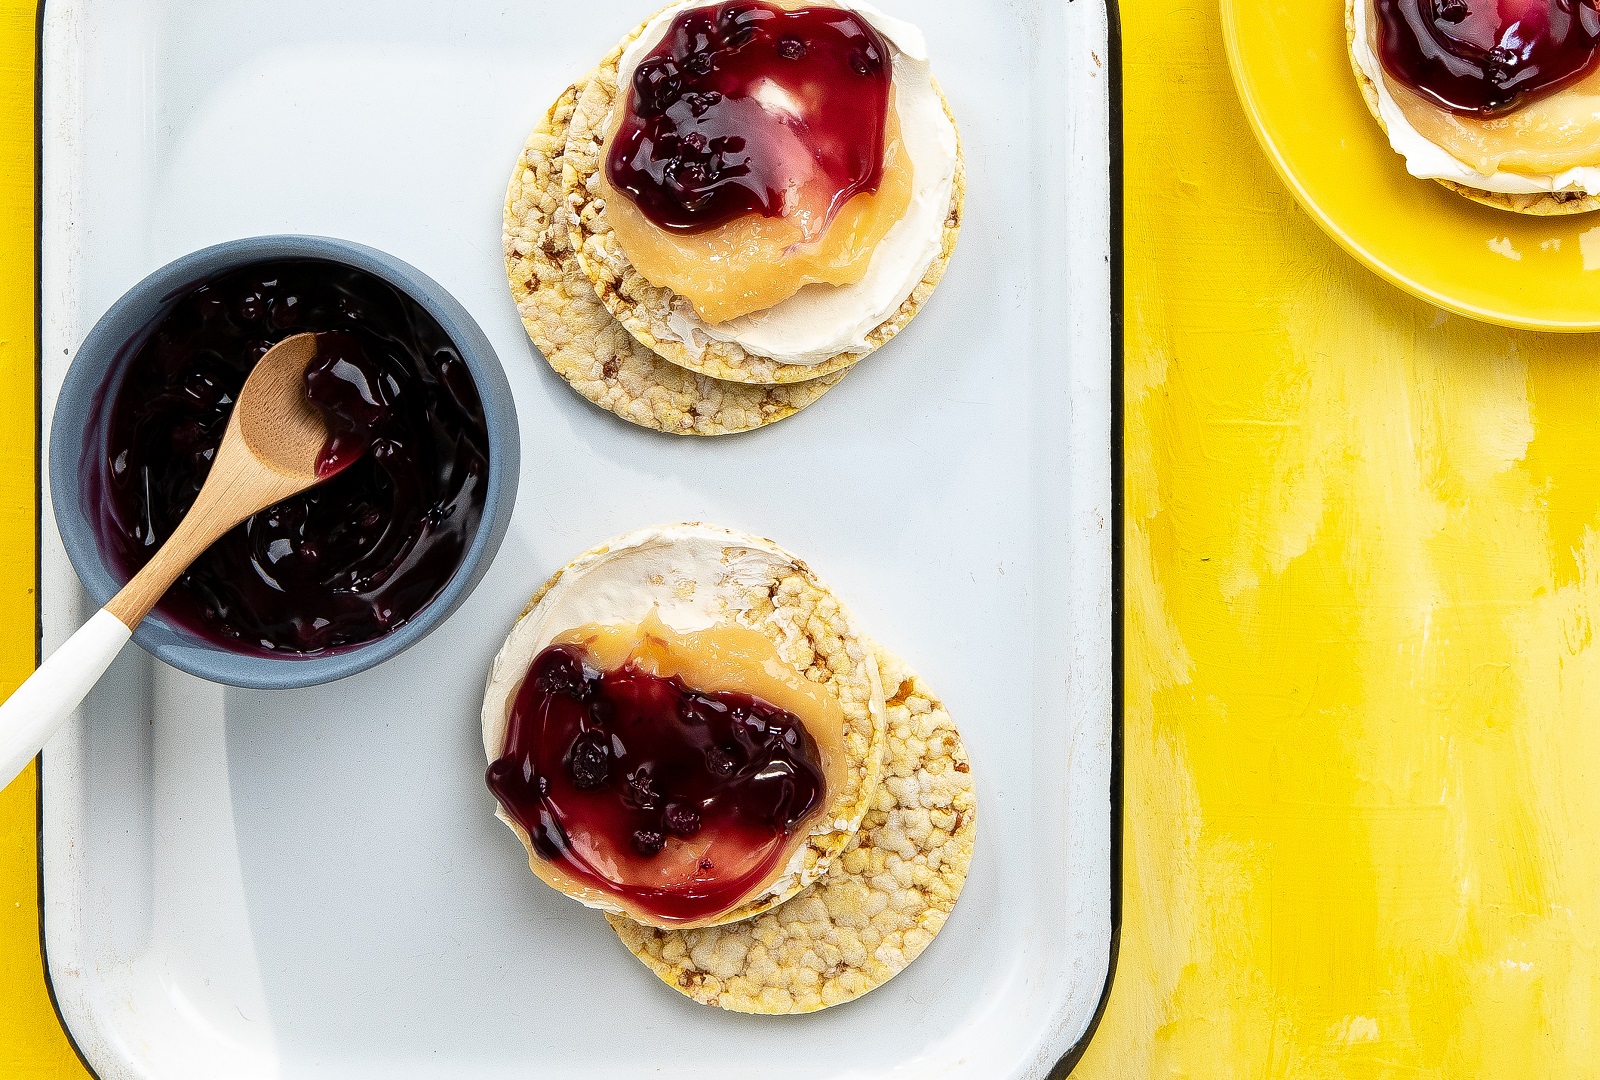 Cream Cheese, Lemon Curd & Blueberry Compote on CORN THINS slices